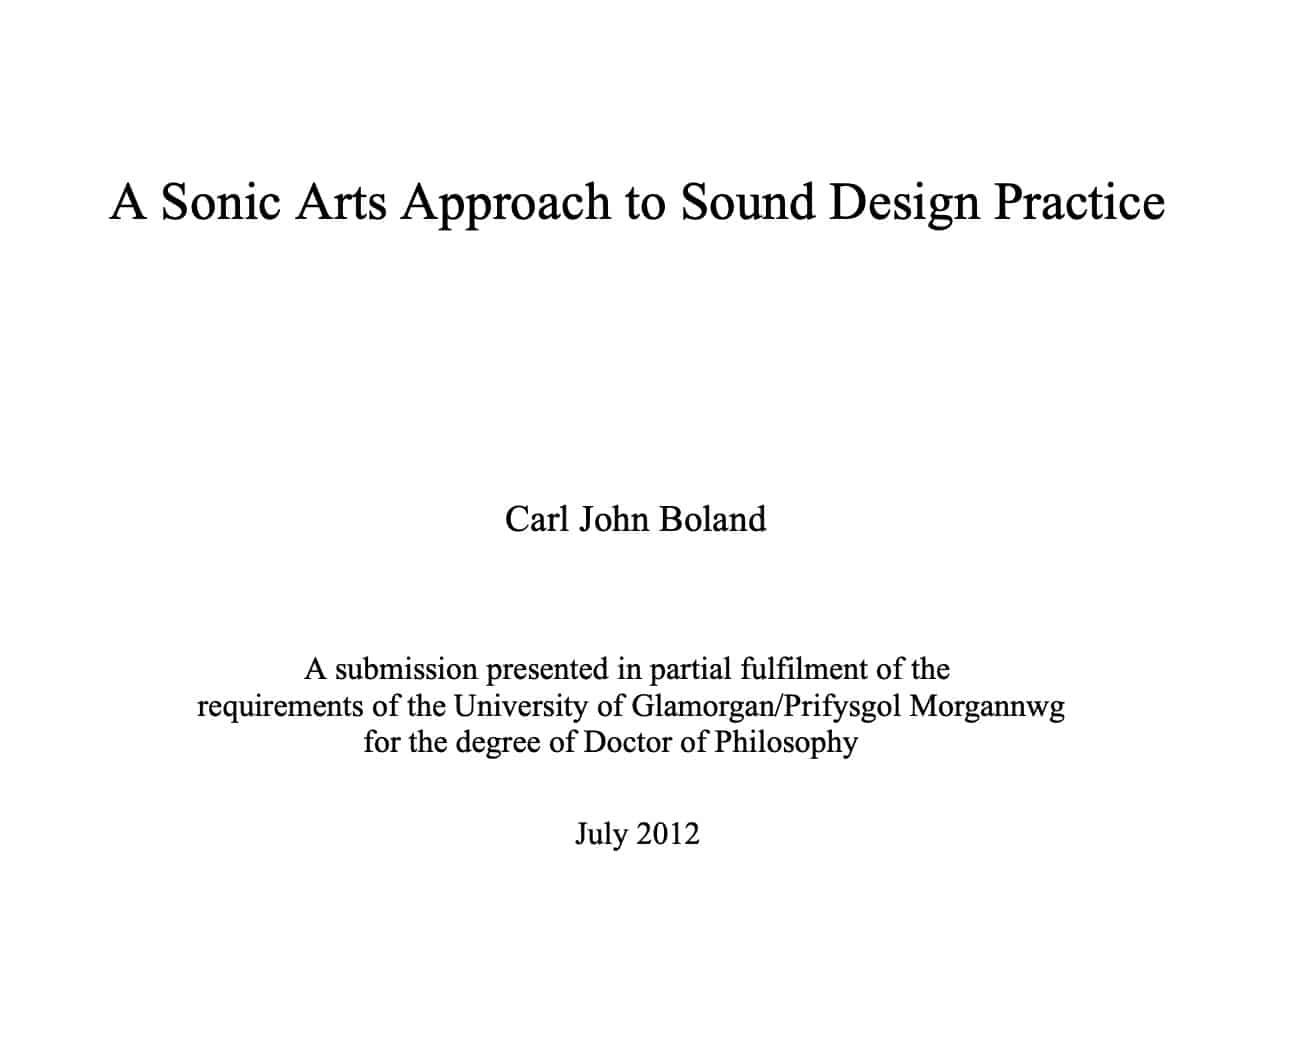 A Sonic Arts Approach to Sound Design